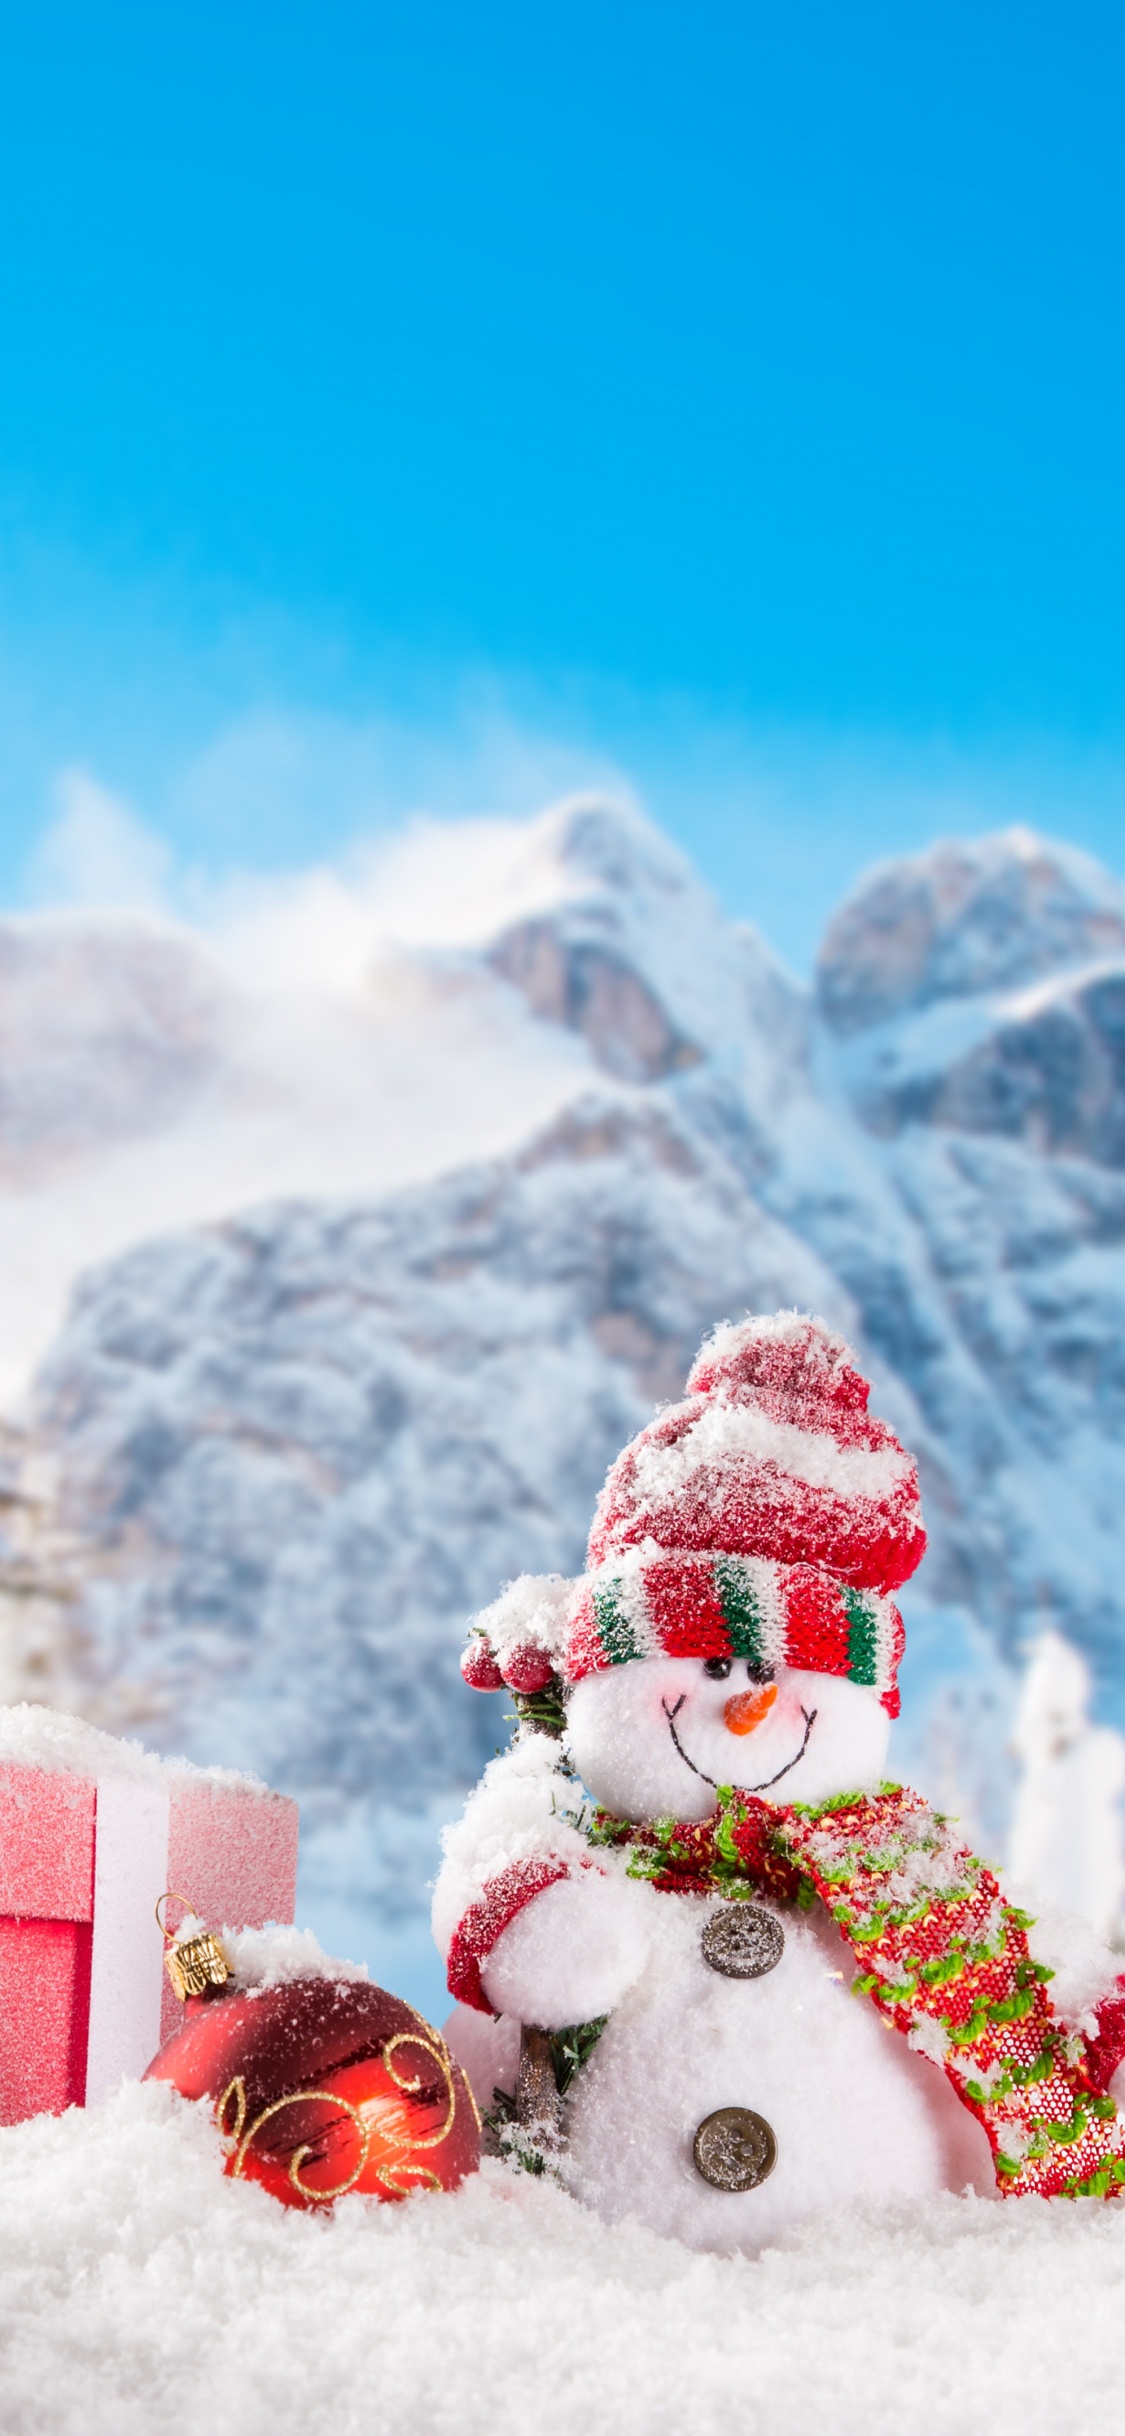 Red and White Santa Claus on Snow Covered Ground During Daytime. Wallpaper in 1125x2436 Resolution